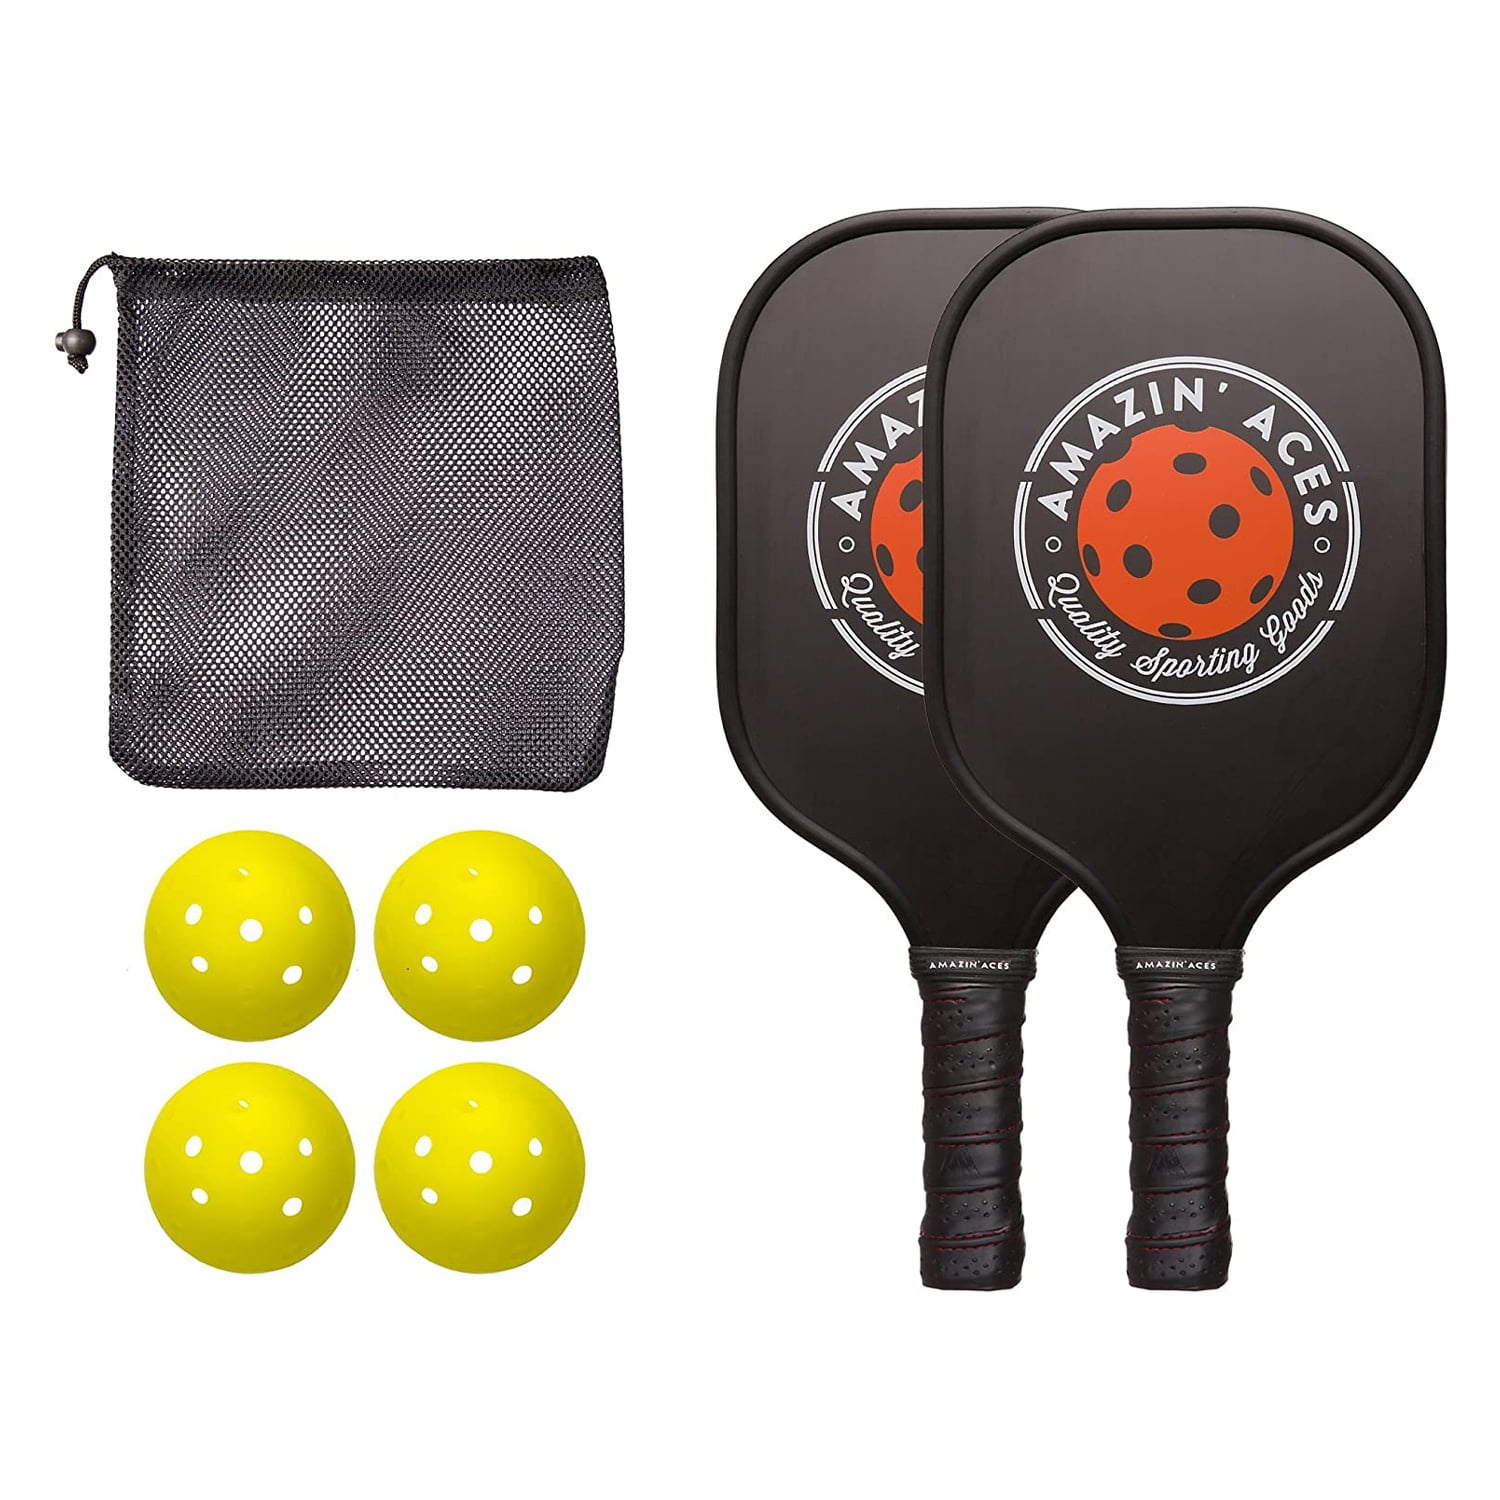 FREE COVER FREE BALL Amazing aces 2 X pickleball paddle 